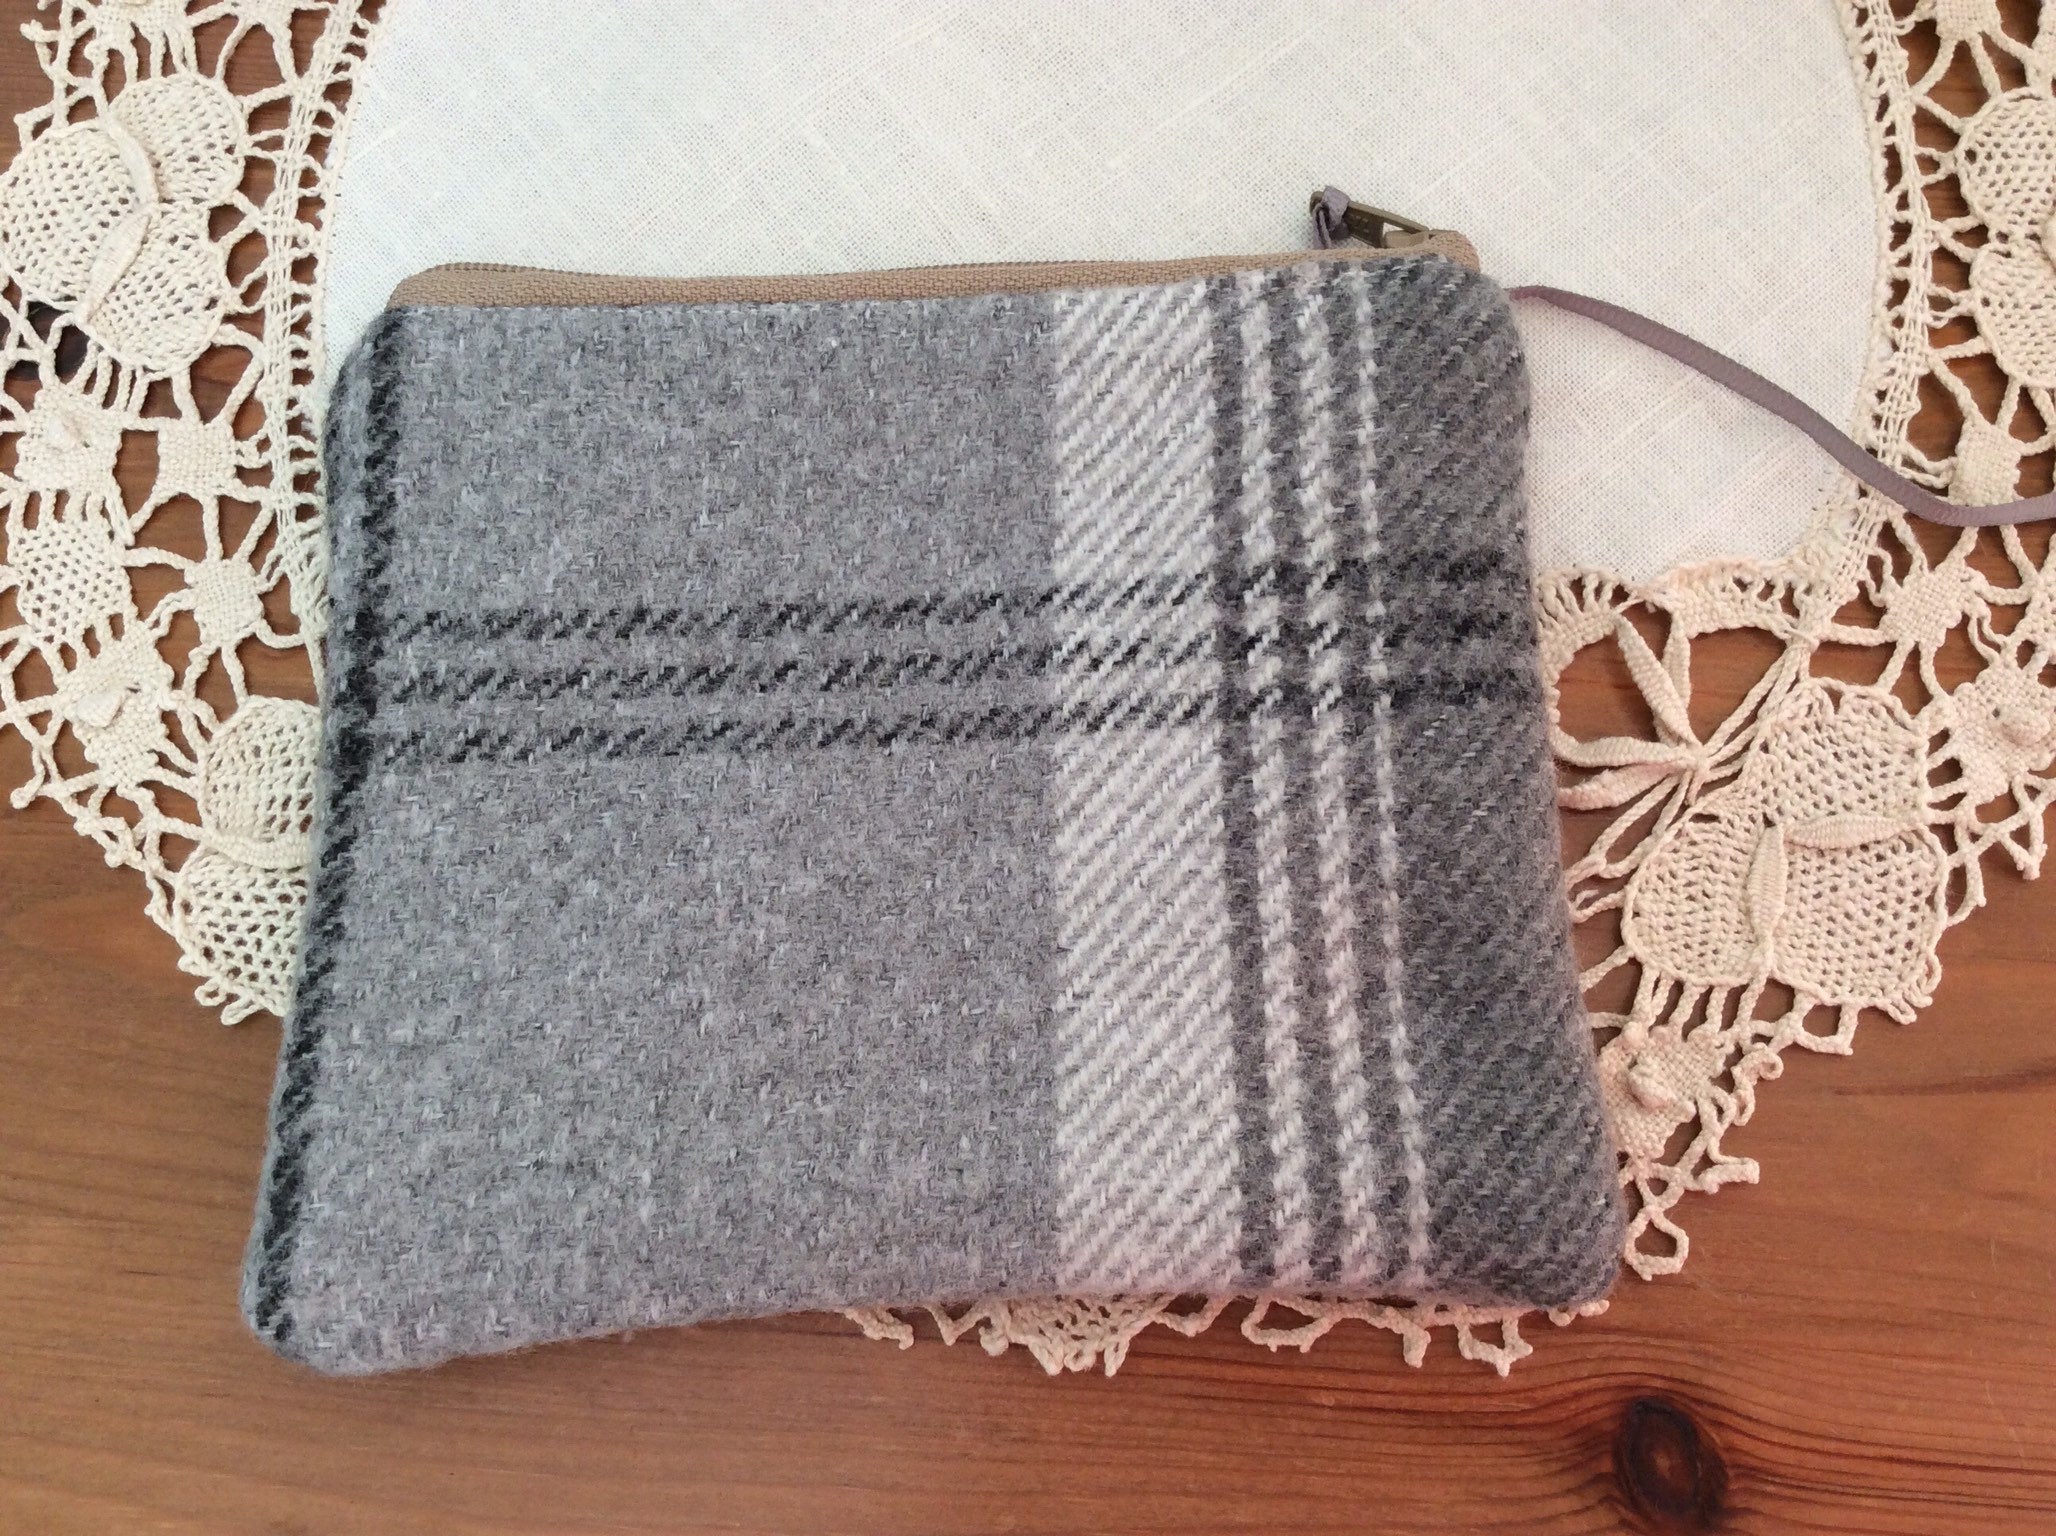 Zipped Purse - grey and beige